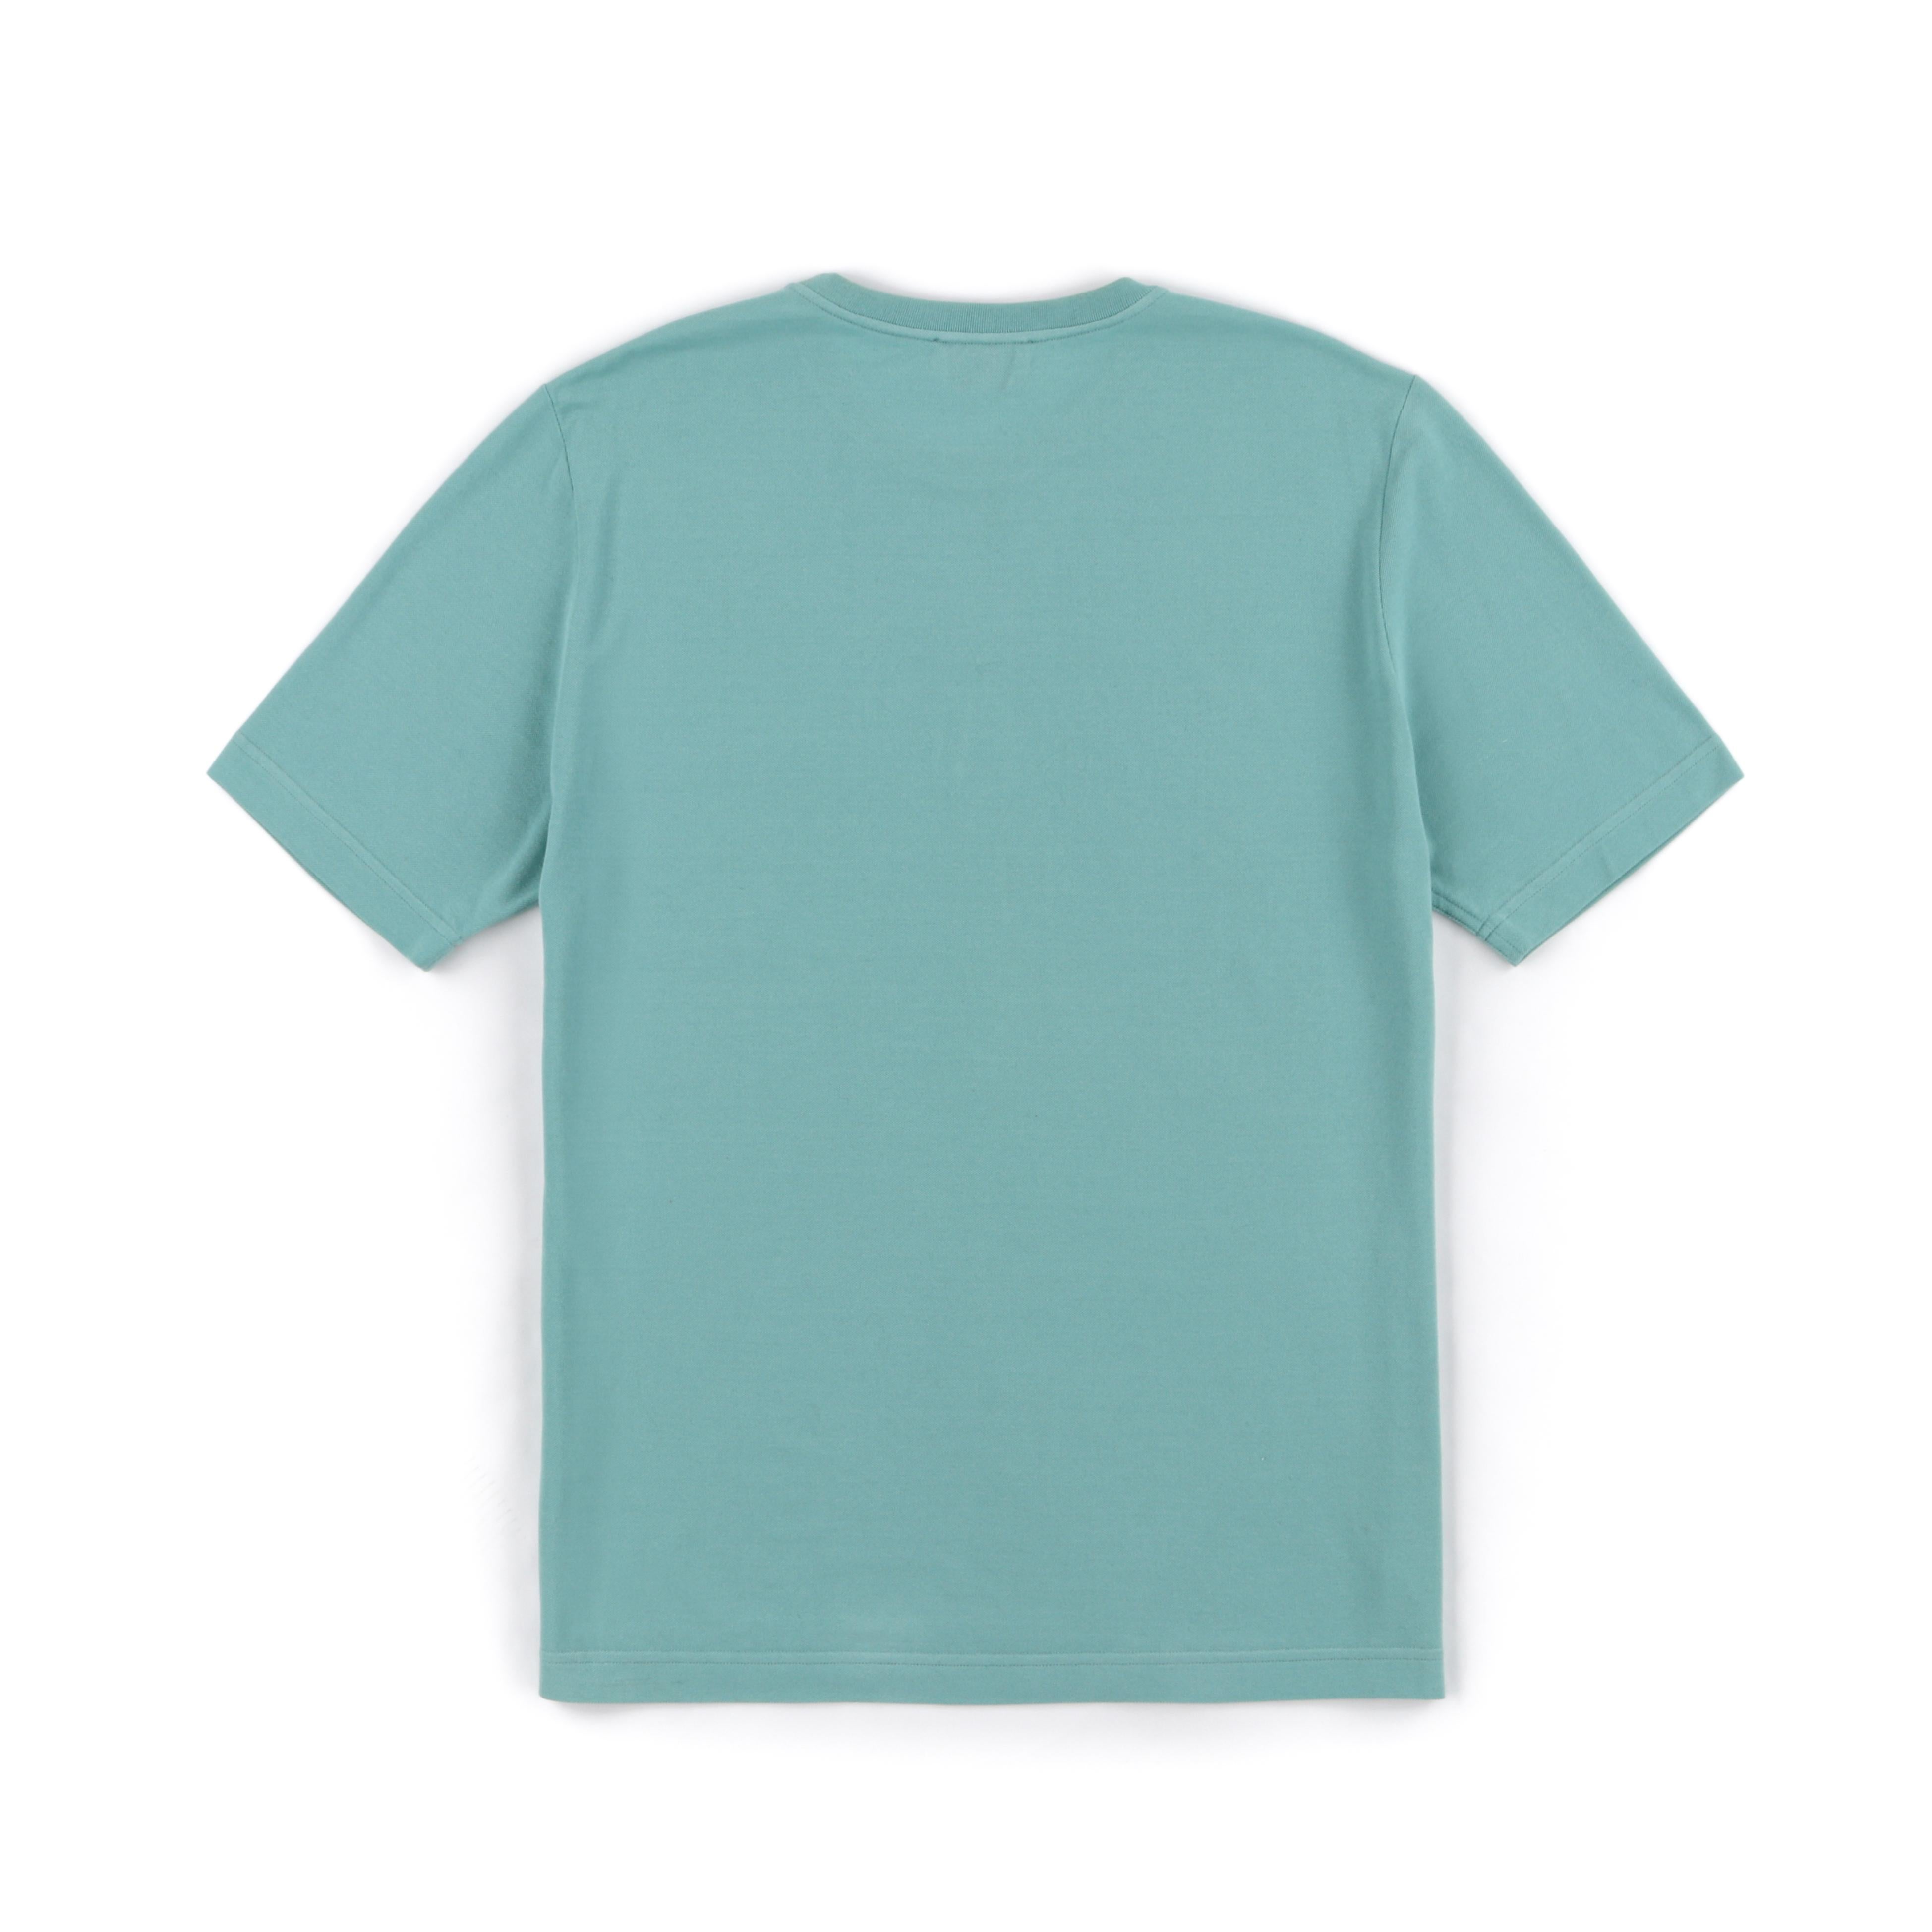 HERMES Turquoise Piqué H Embroidered Patch Pocket Short Sleeve T Shirt Top
 
Brand / Manufacturer: Hermes
Designer: Véronique Nichanian
Style: T shirt
Color(s): Shades of turquoise green
Lined: No
Marked Fabric Content: “100% cotton”
Additional